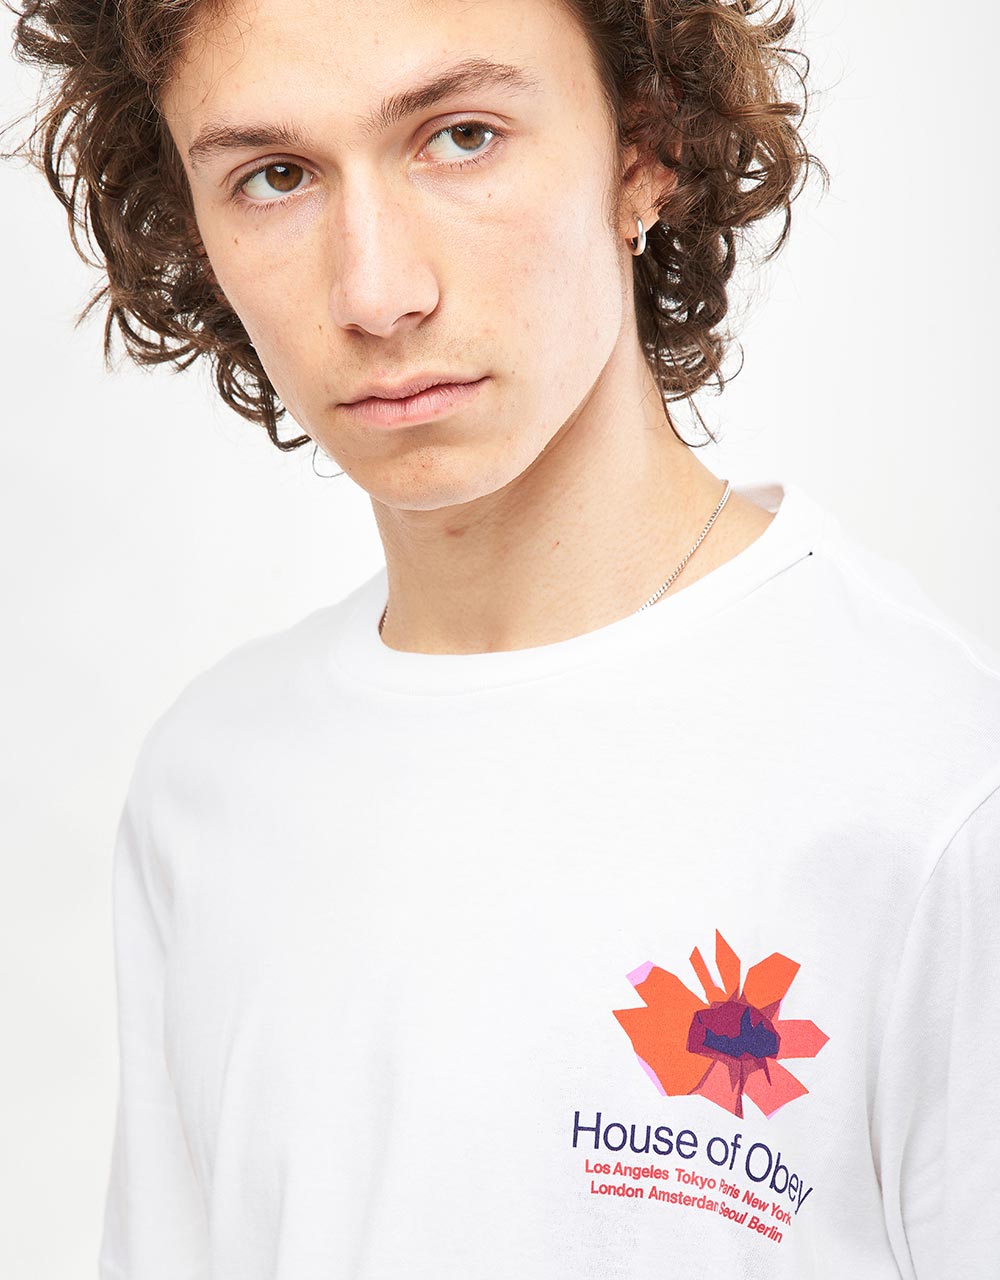 Obey House Of Floral T-Shirt - White